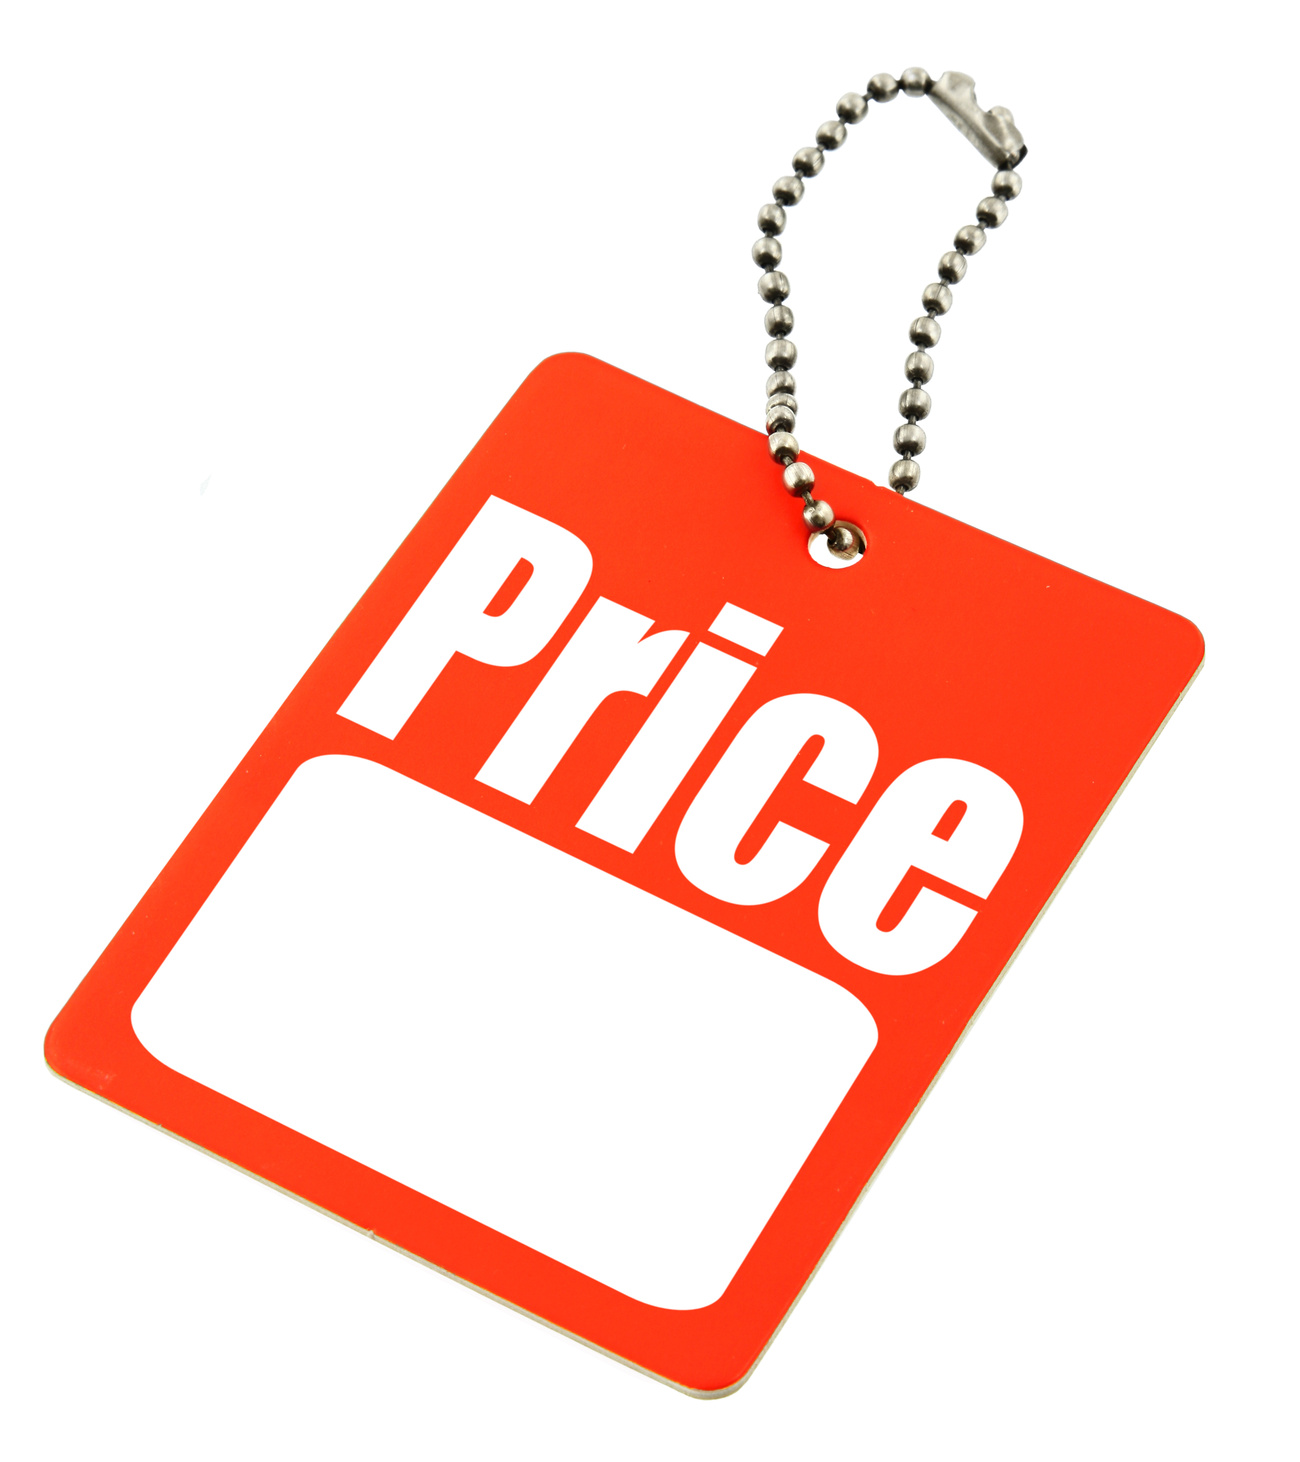 Blank price tag clipart 2